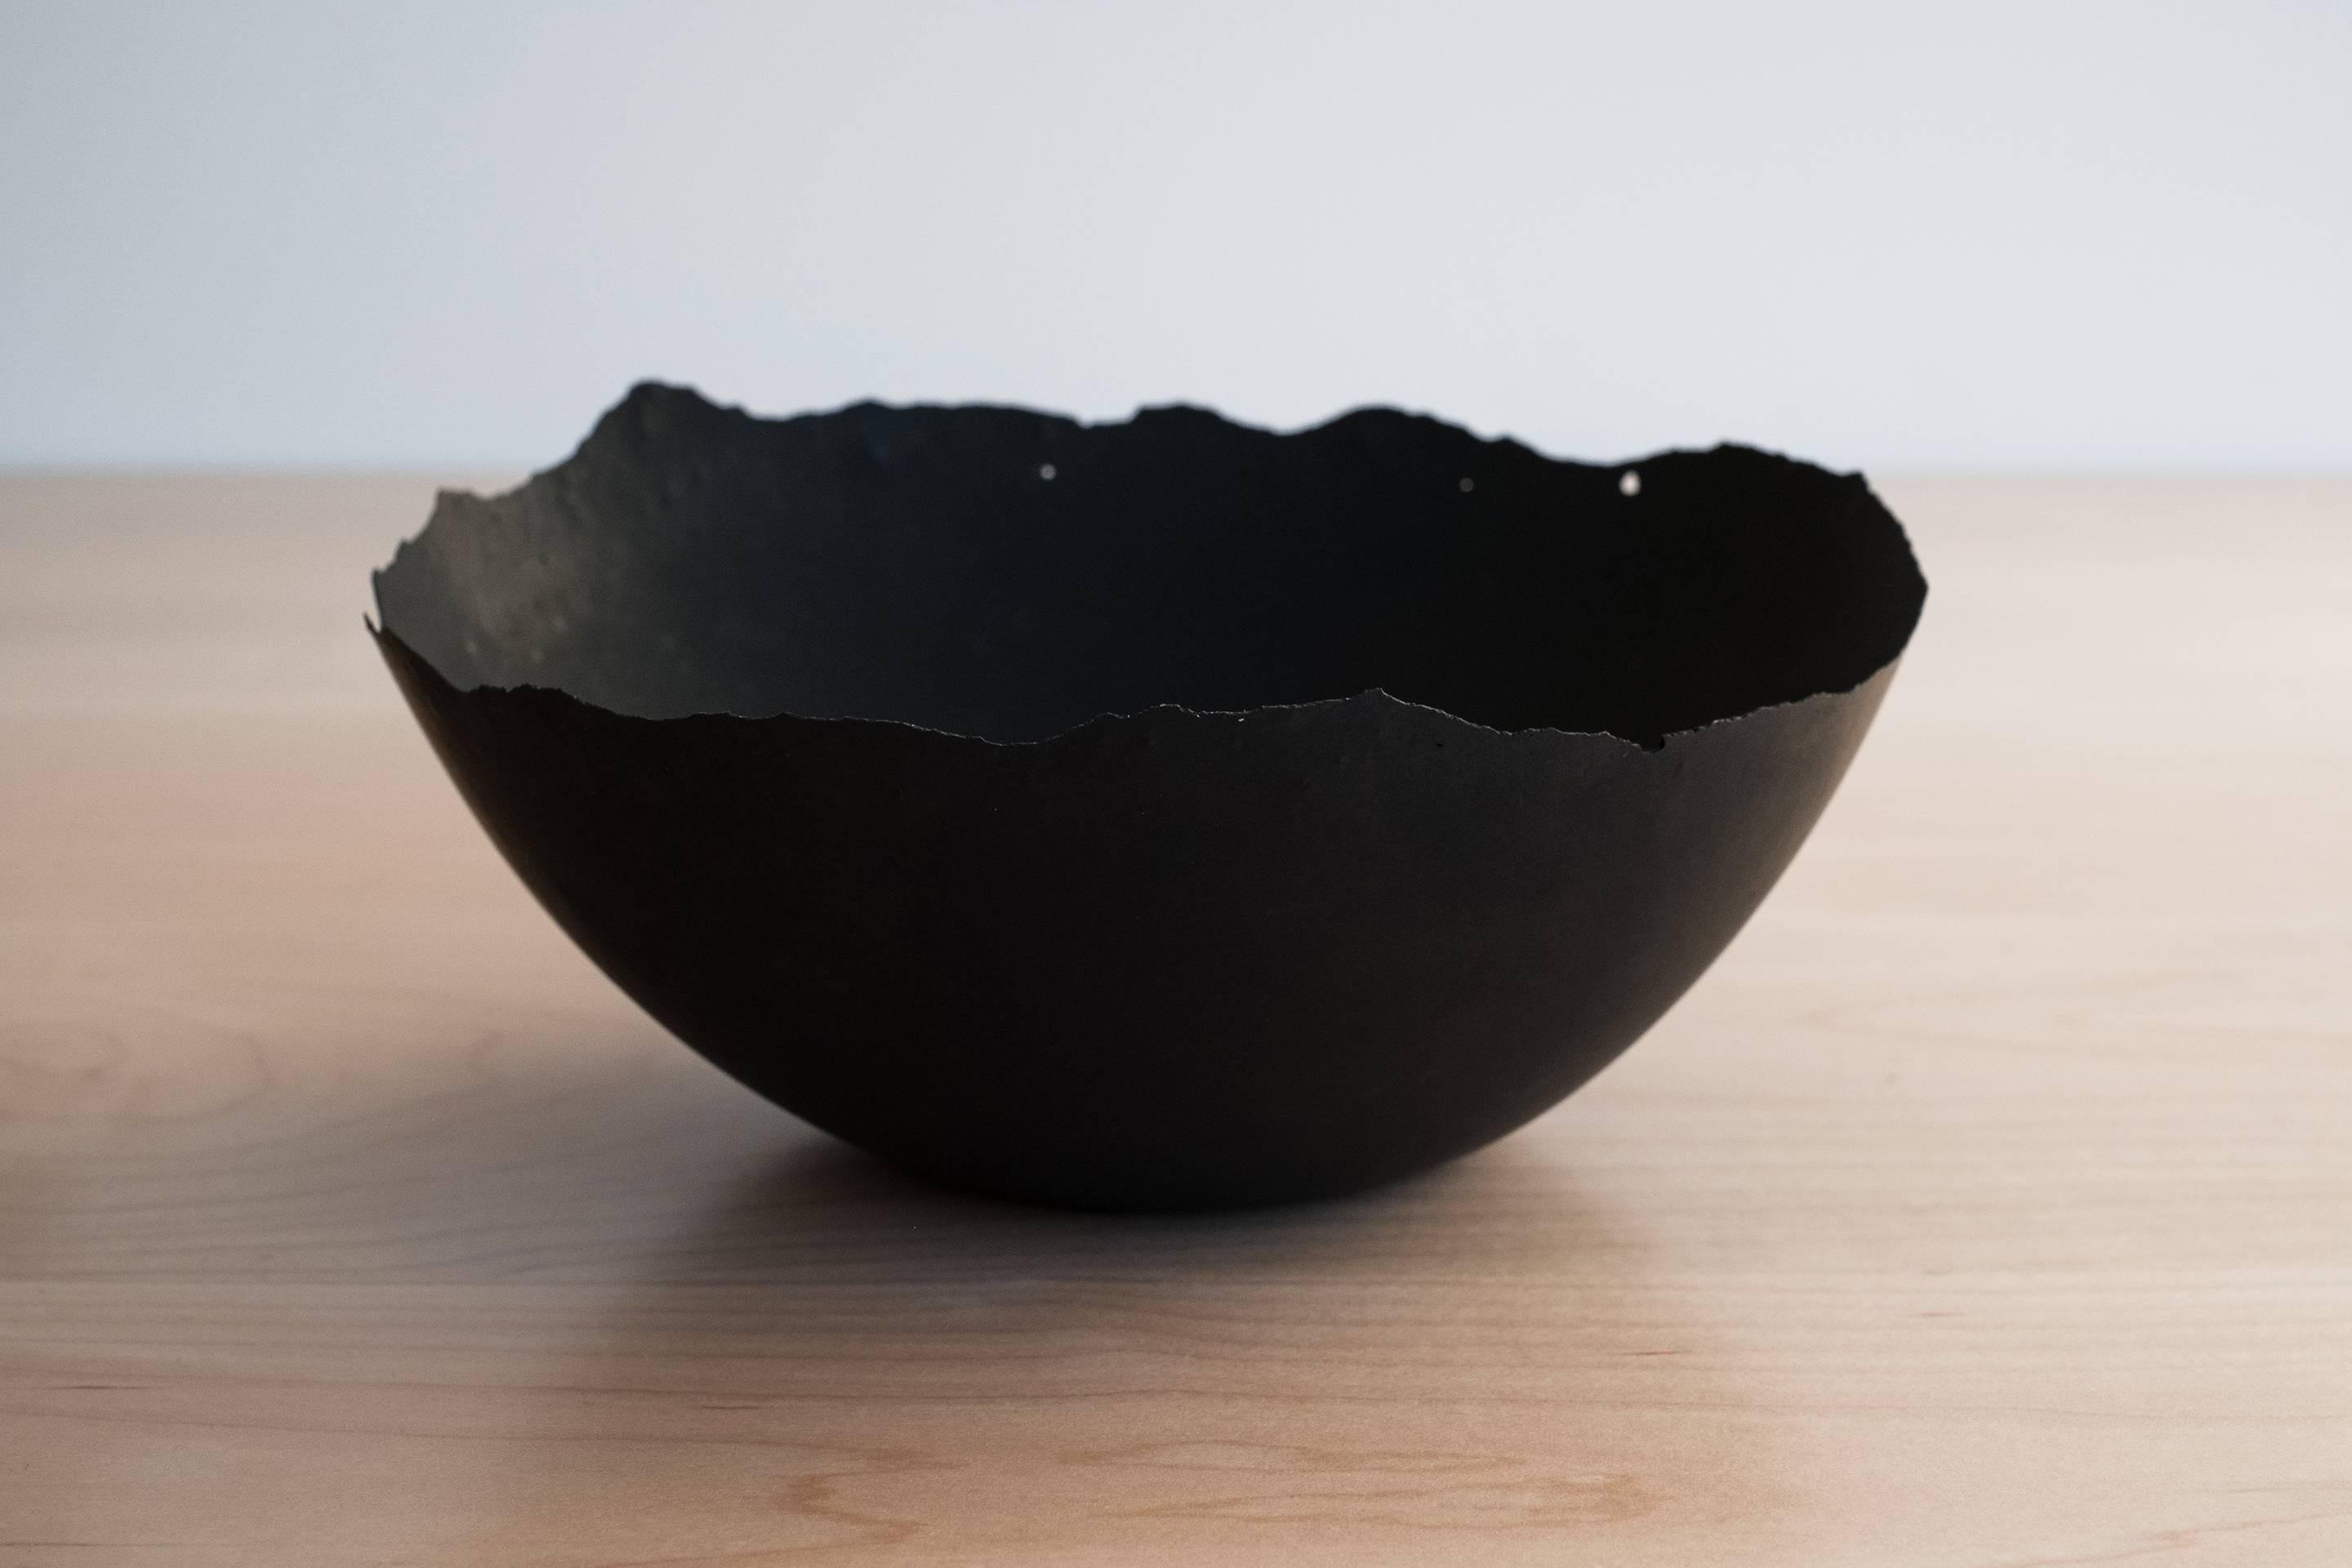 A collection of 200 unique bowls, the concrete series by UMÉ studio expresses the tension between heavy concrete and its delicate edge generated by hand pouring. While one assumes concrete should be strong and durable, it is, at its core, fragile.